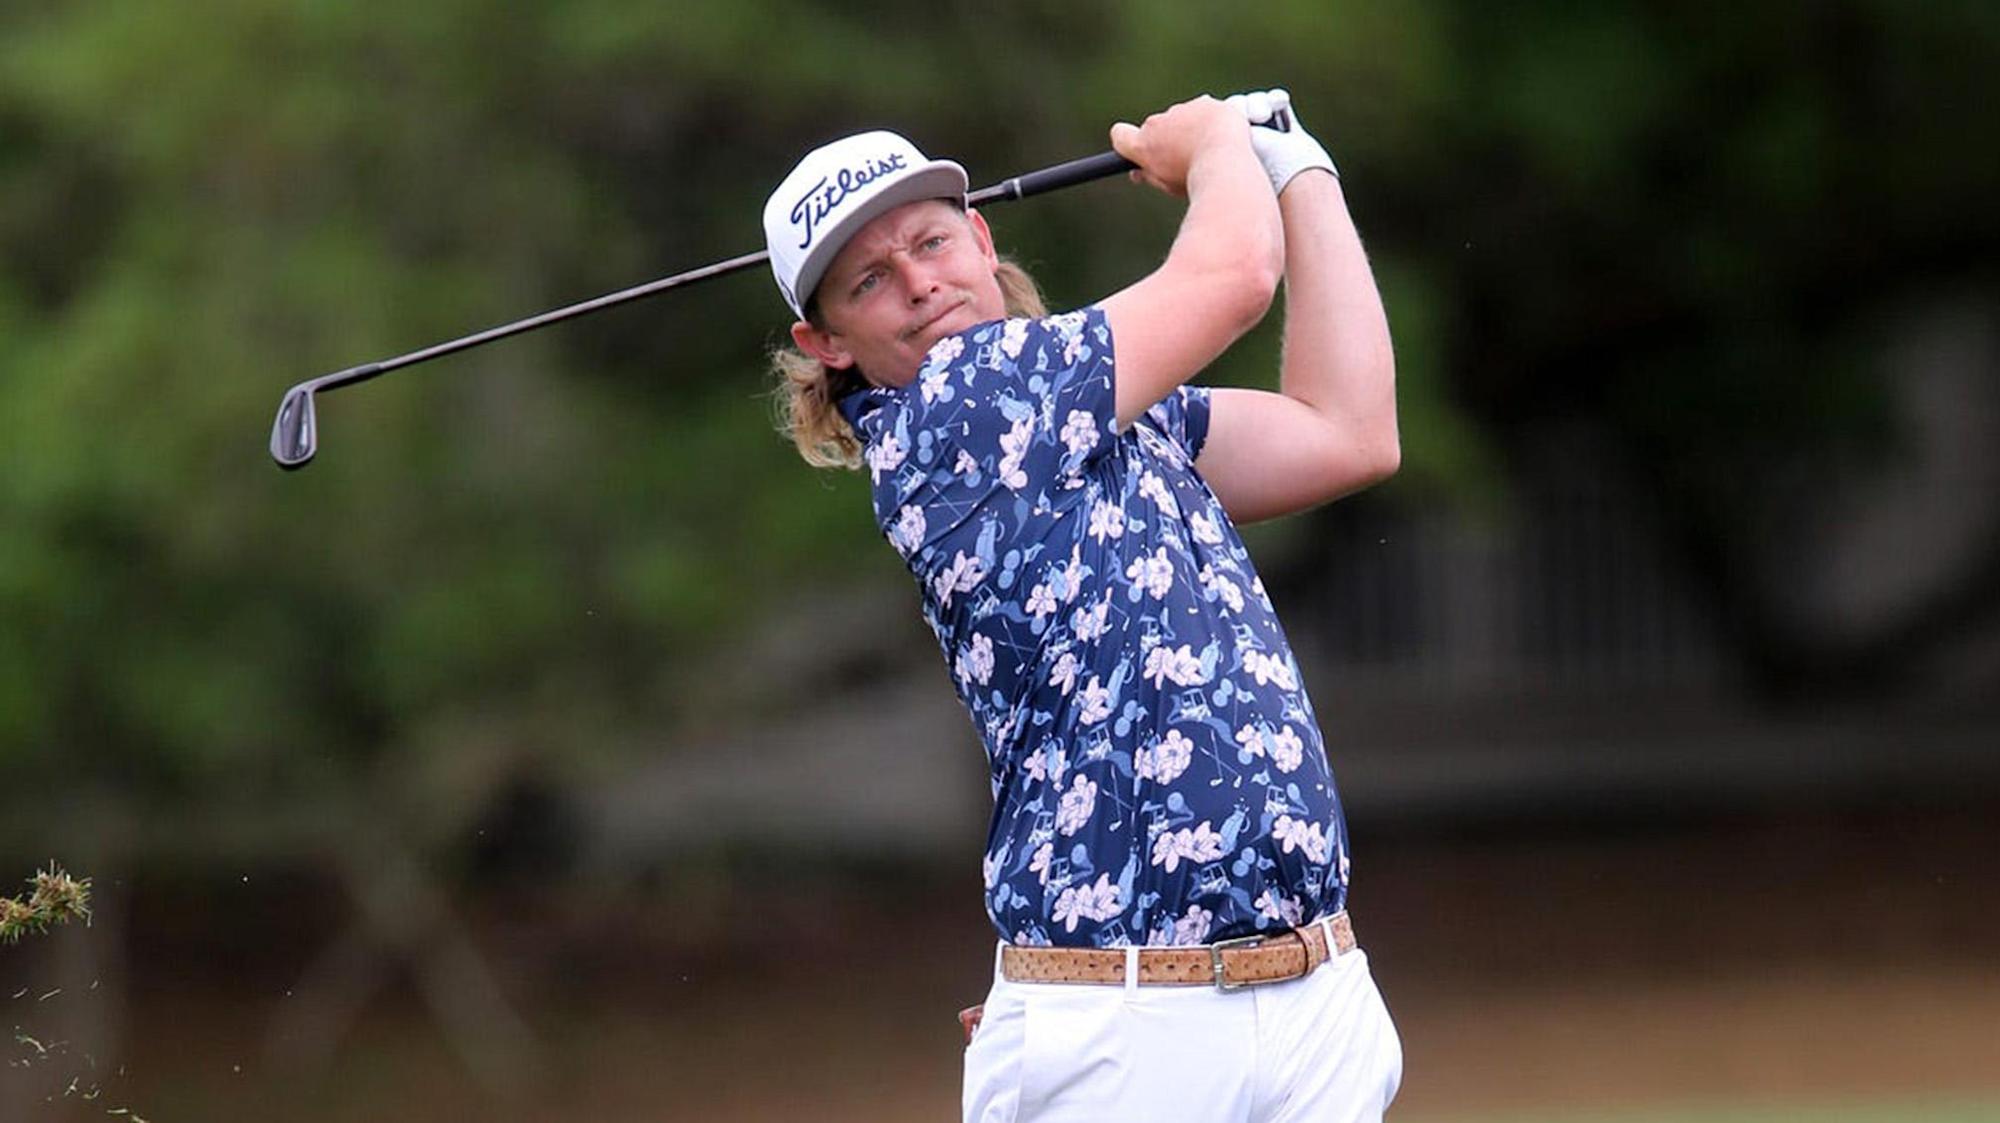 Golf masculino olímpico: Smith to Mount Charge